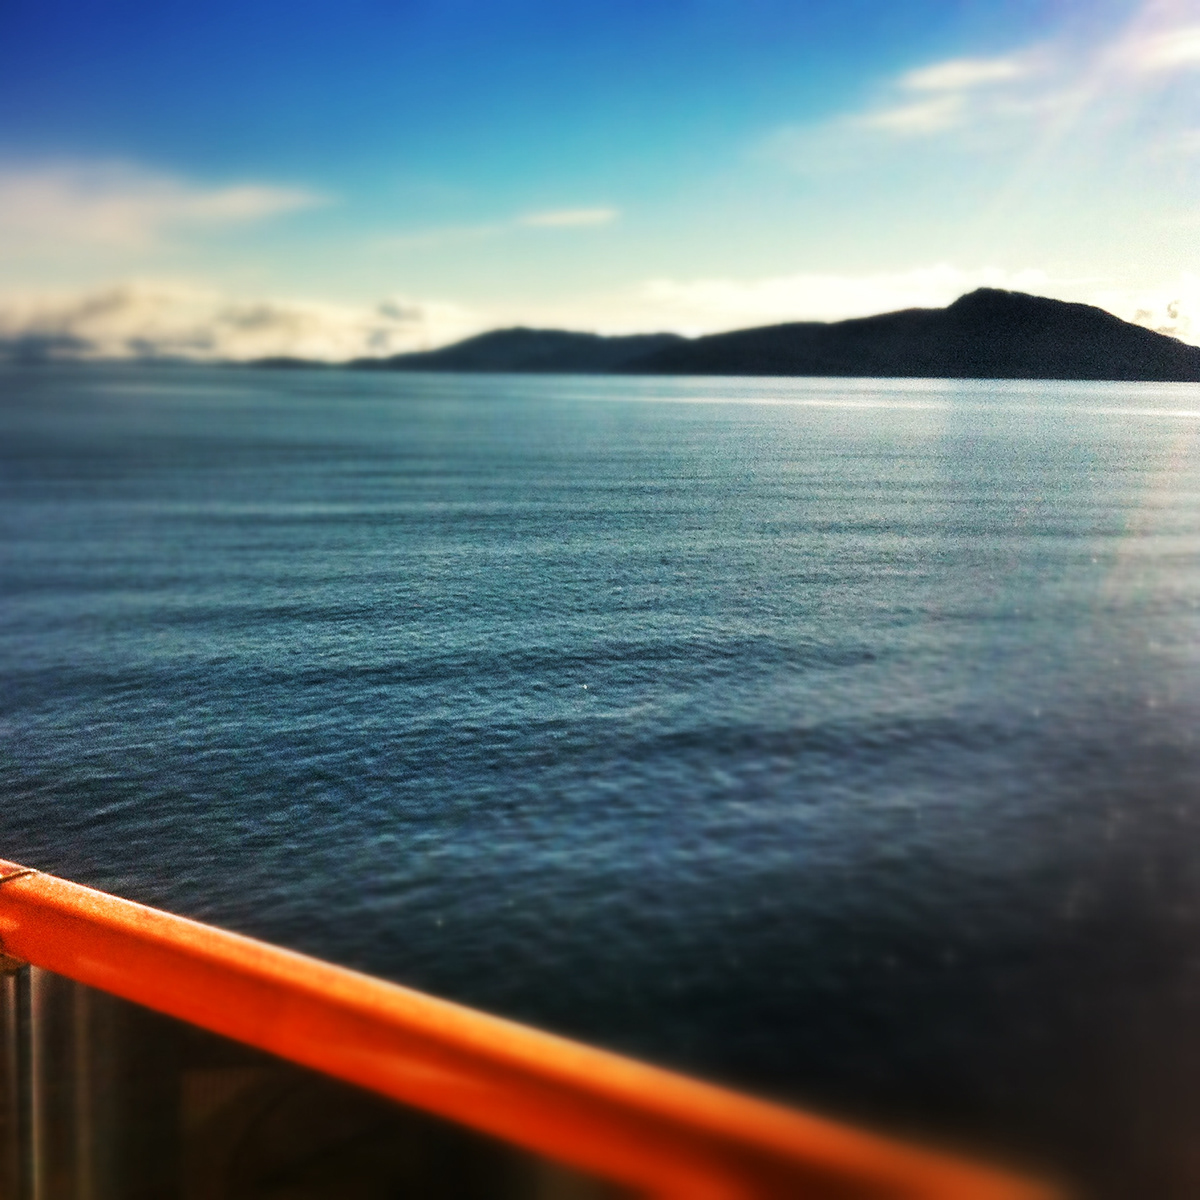 Alaska cruise ship iphone Iphone 4 Snapseed instagram artsy Hipster Landscape mountains glaciers